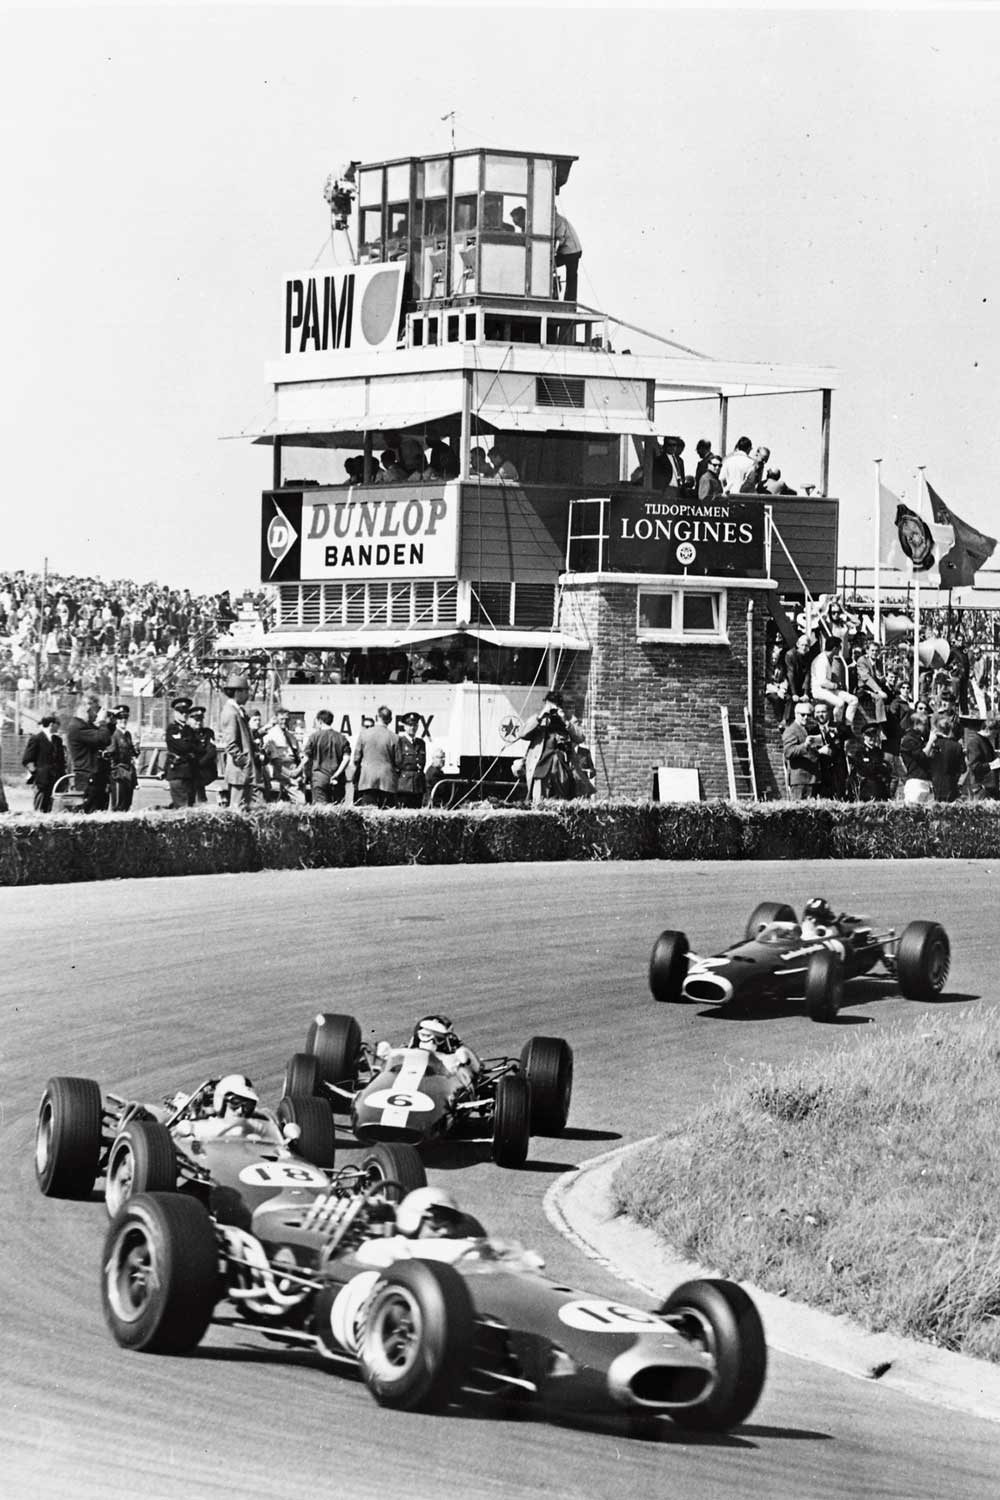 In 1949, the inaugural season of Formula 1, Longines timed several races around the world, including the one in Zandvoort (The Netherlands)